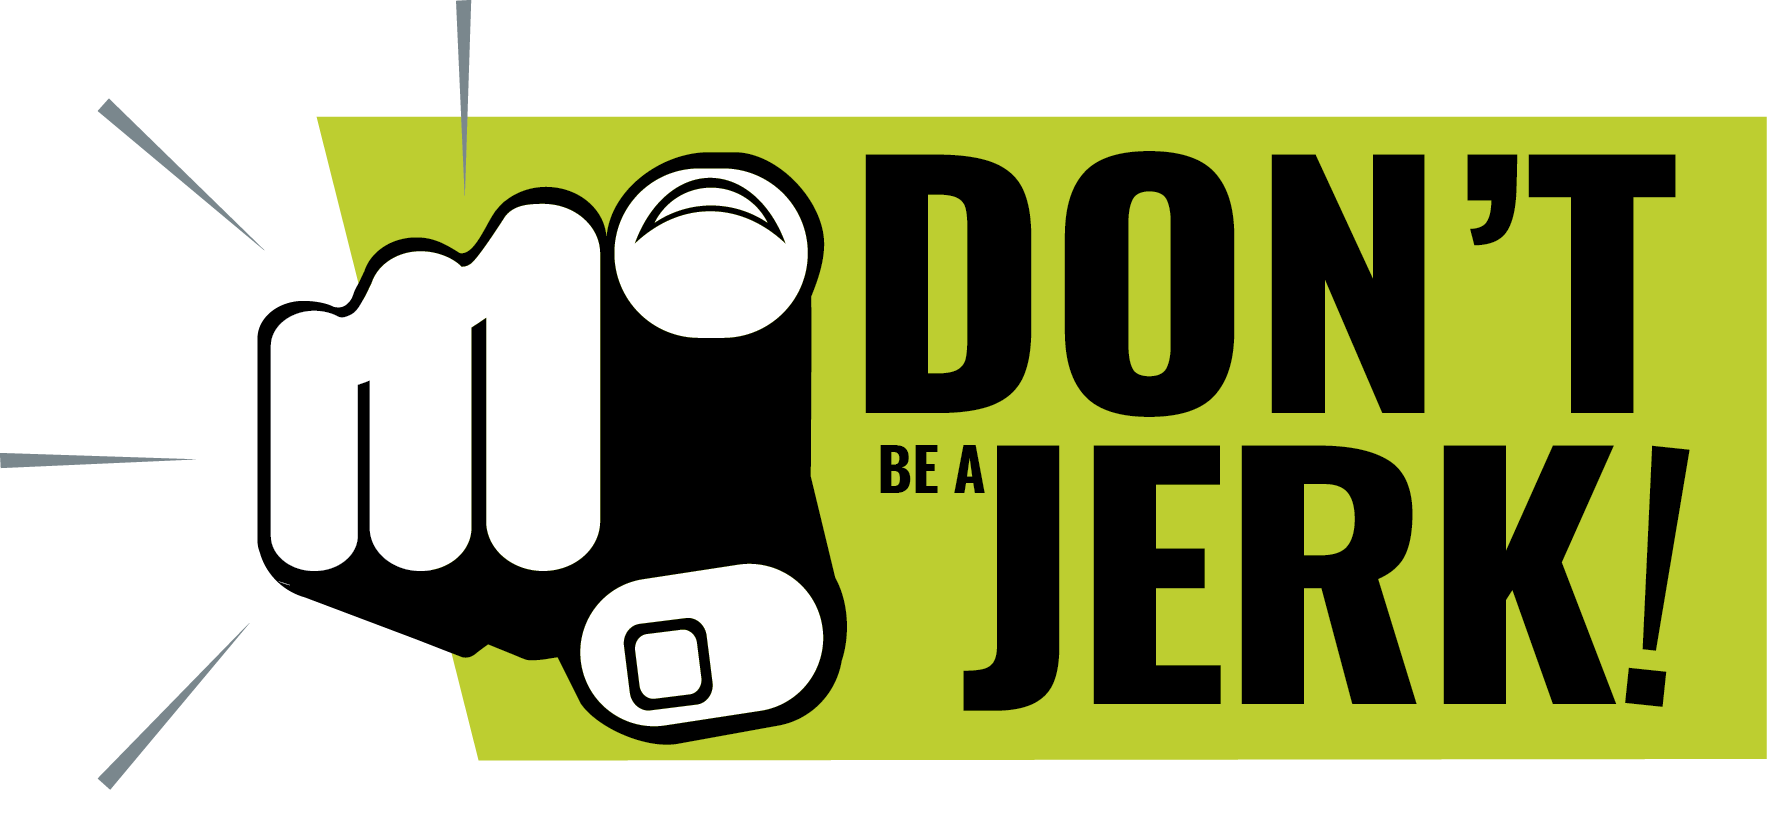 Photo for: Forest Preserve Rolls Out ‘Don’t be a Jerk’ Campaign